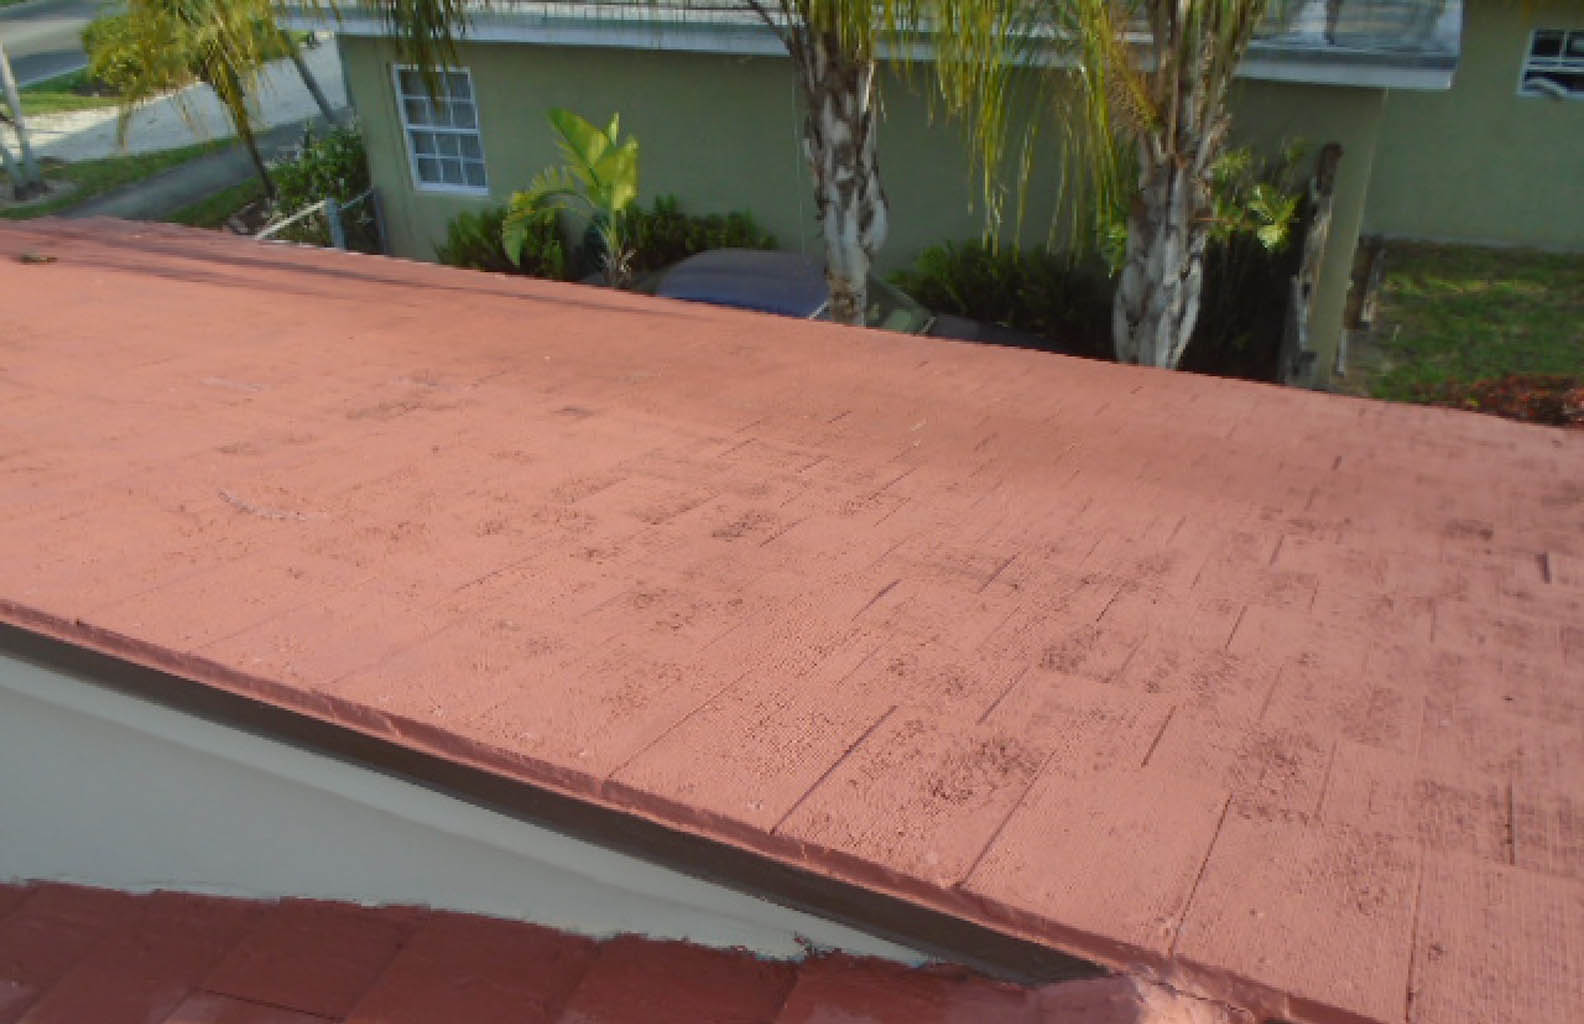 Original Flat Tile Roof & Flat Roof prior to removal